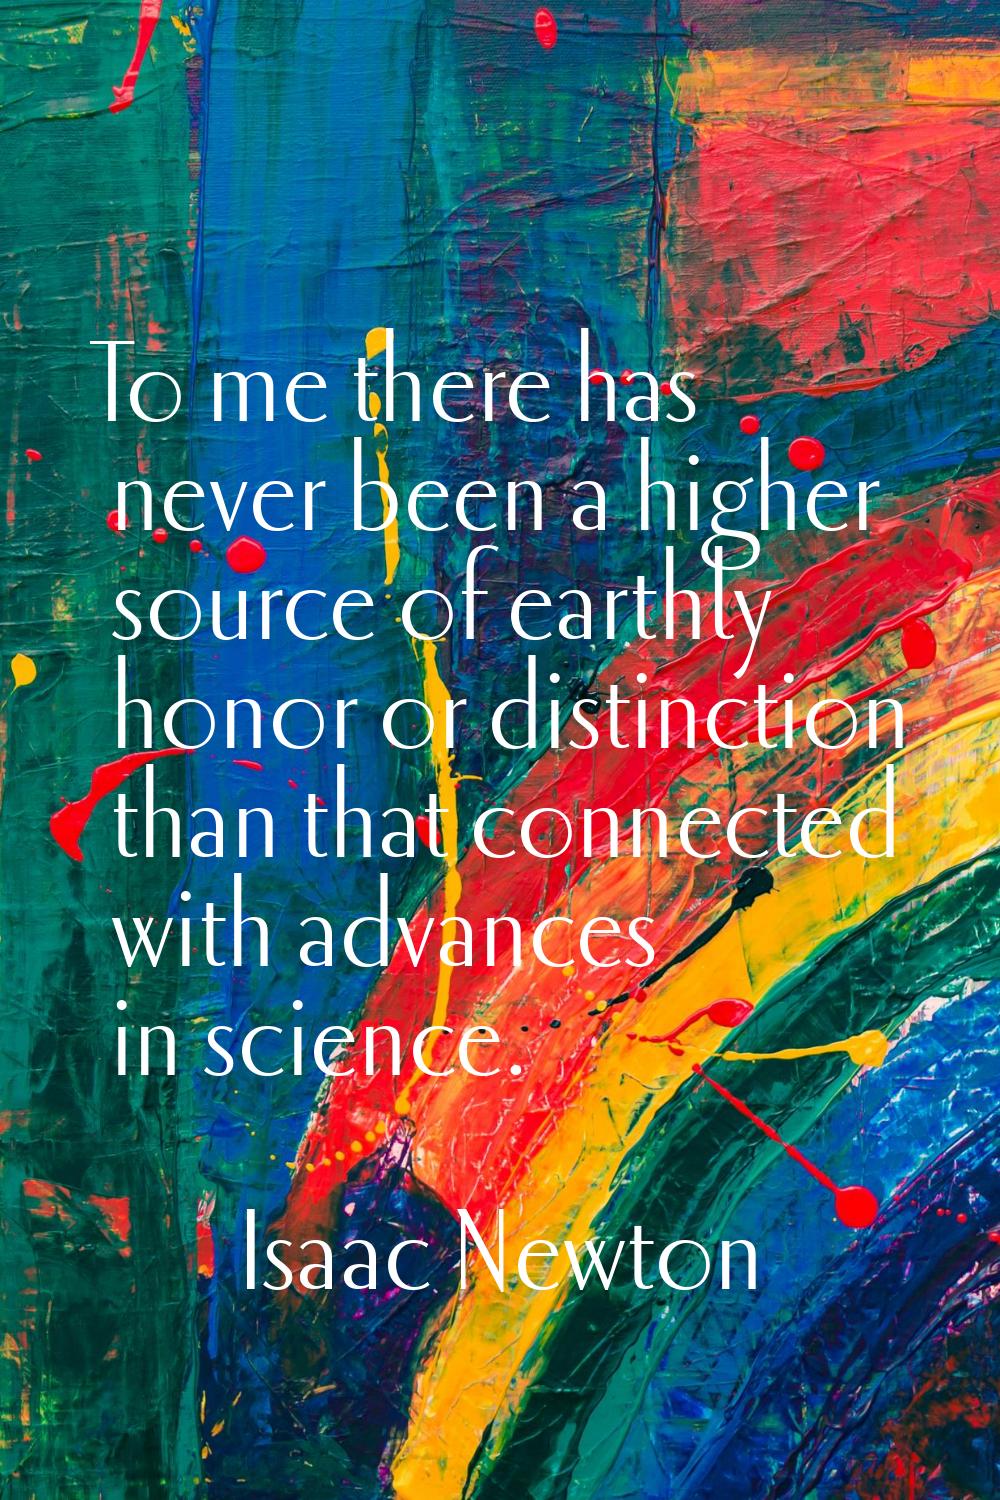 To me there has never been a higher source of earthly honor or distinction than that connected with